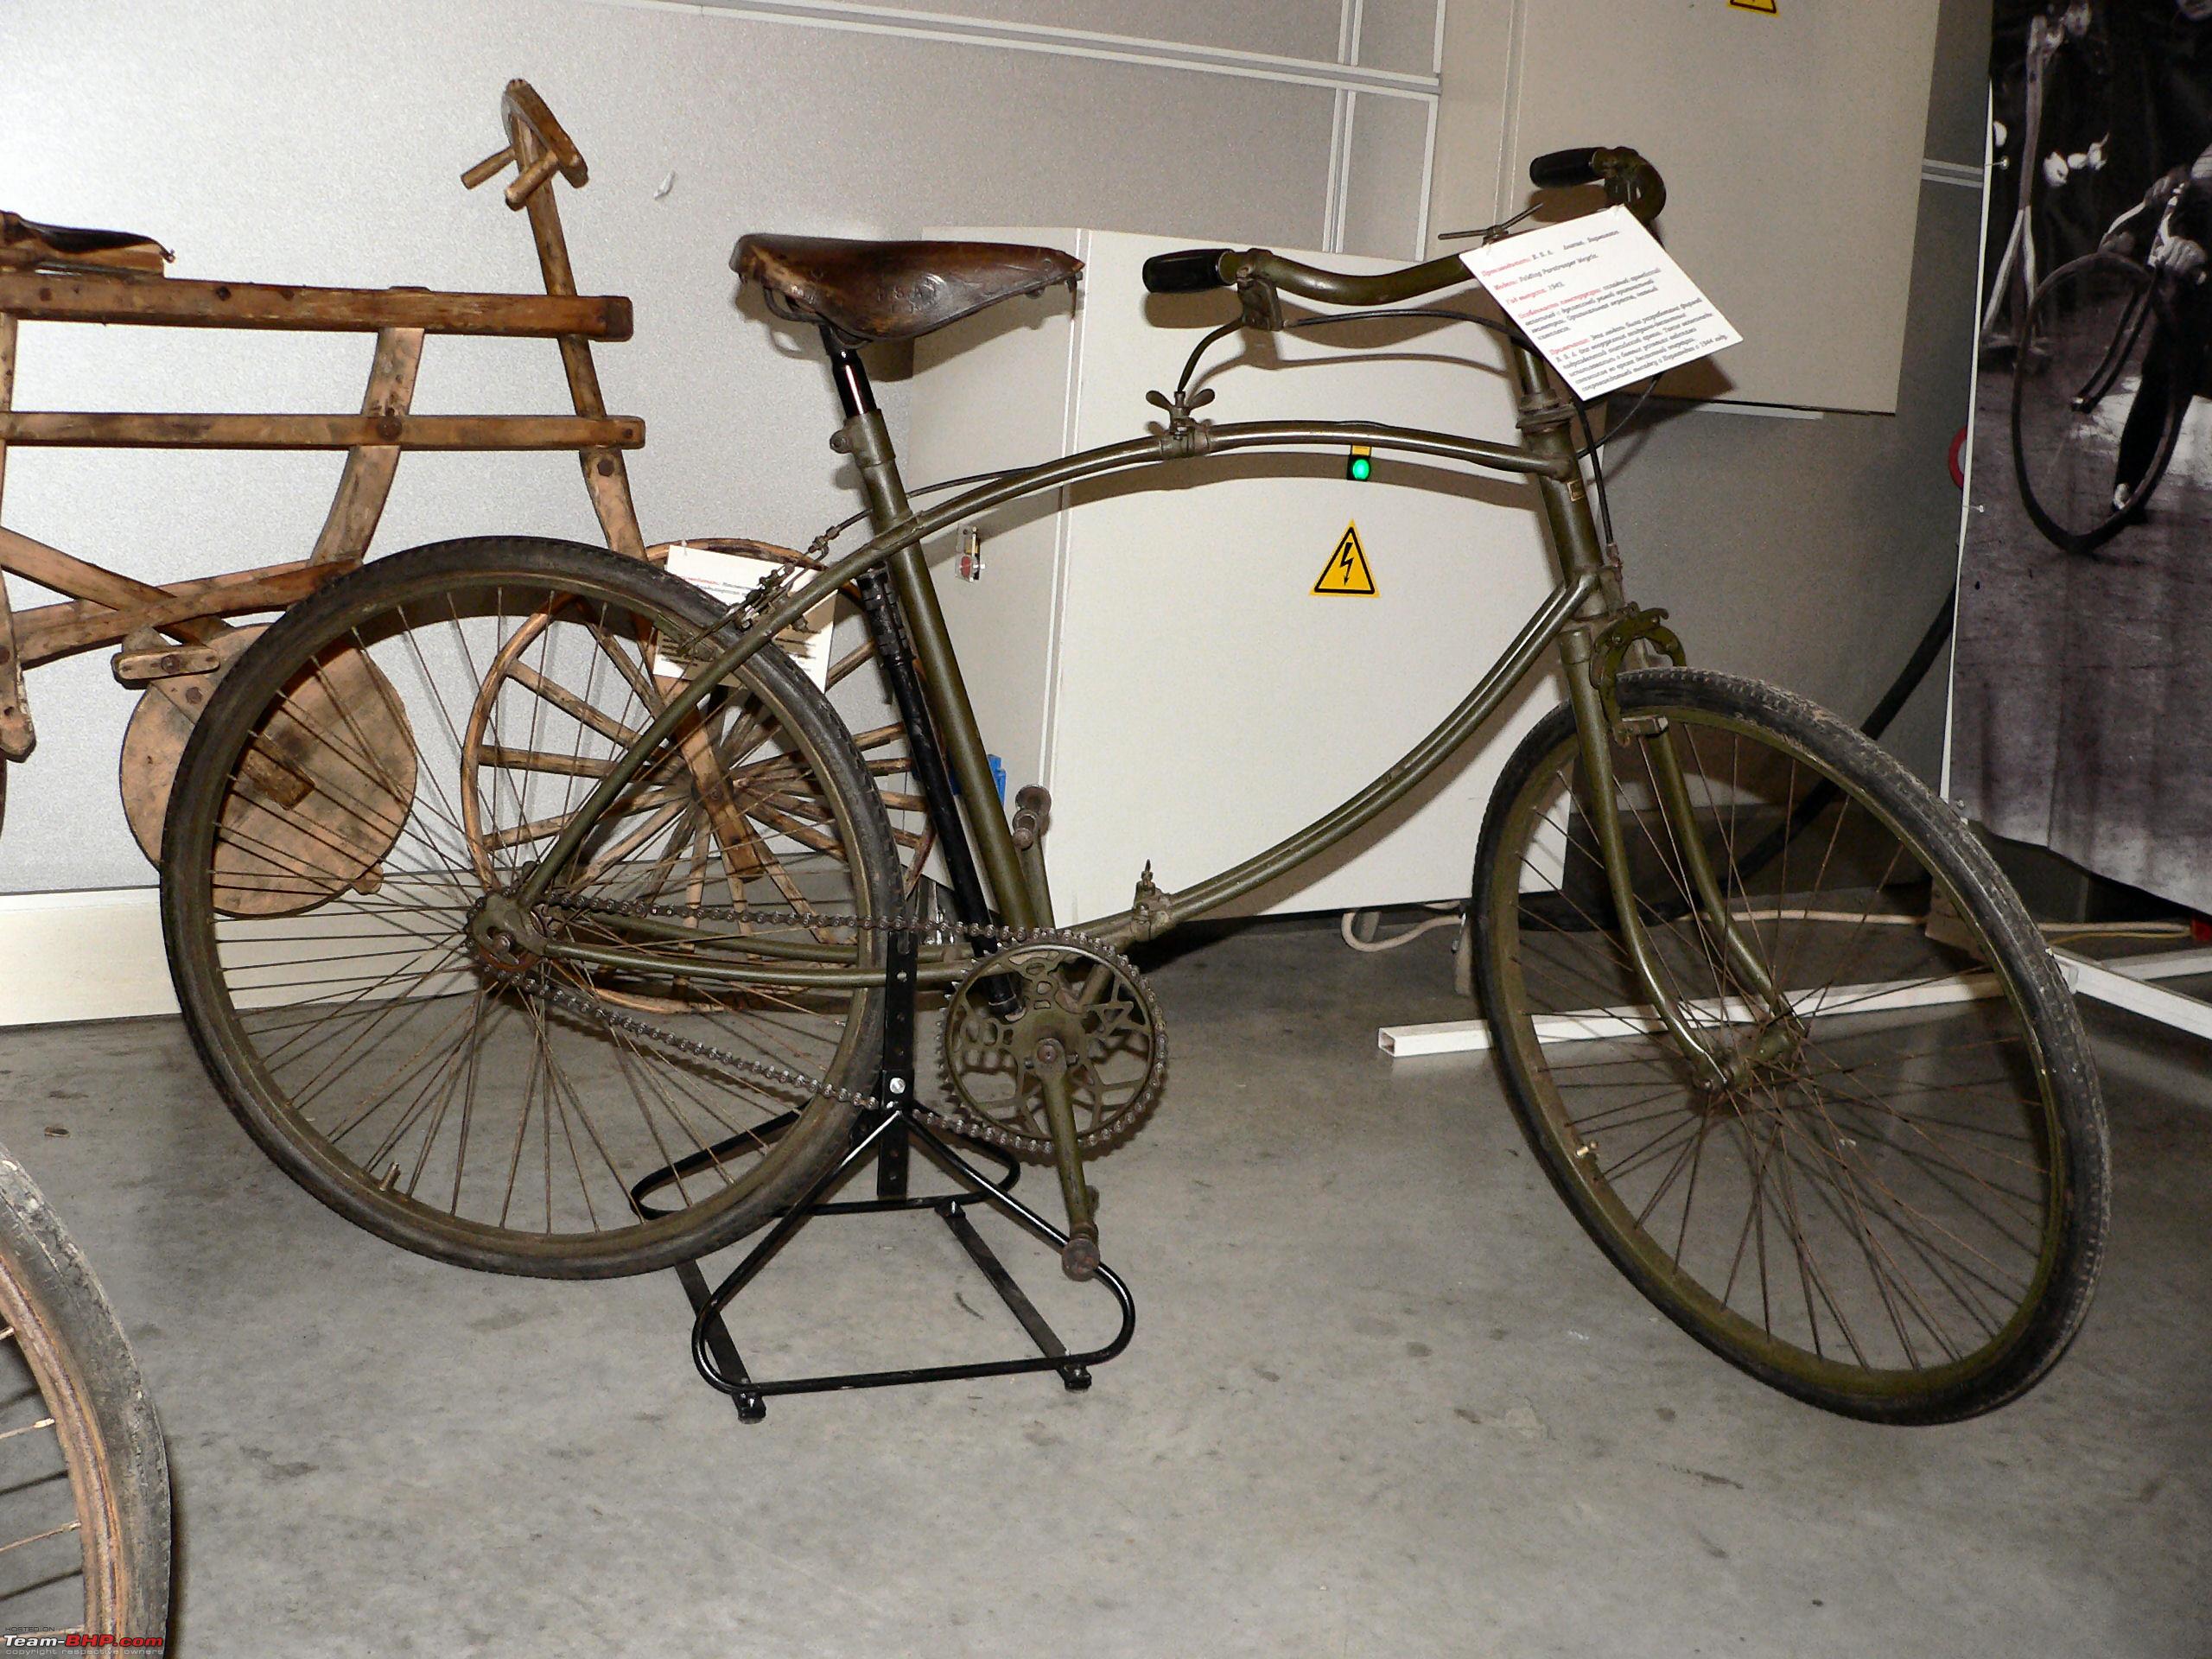 wwii bicycle